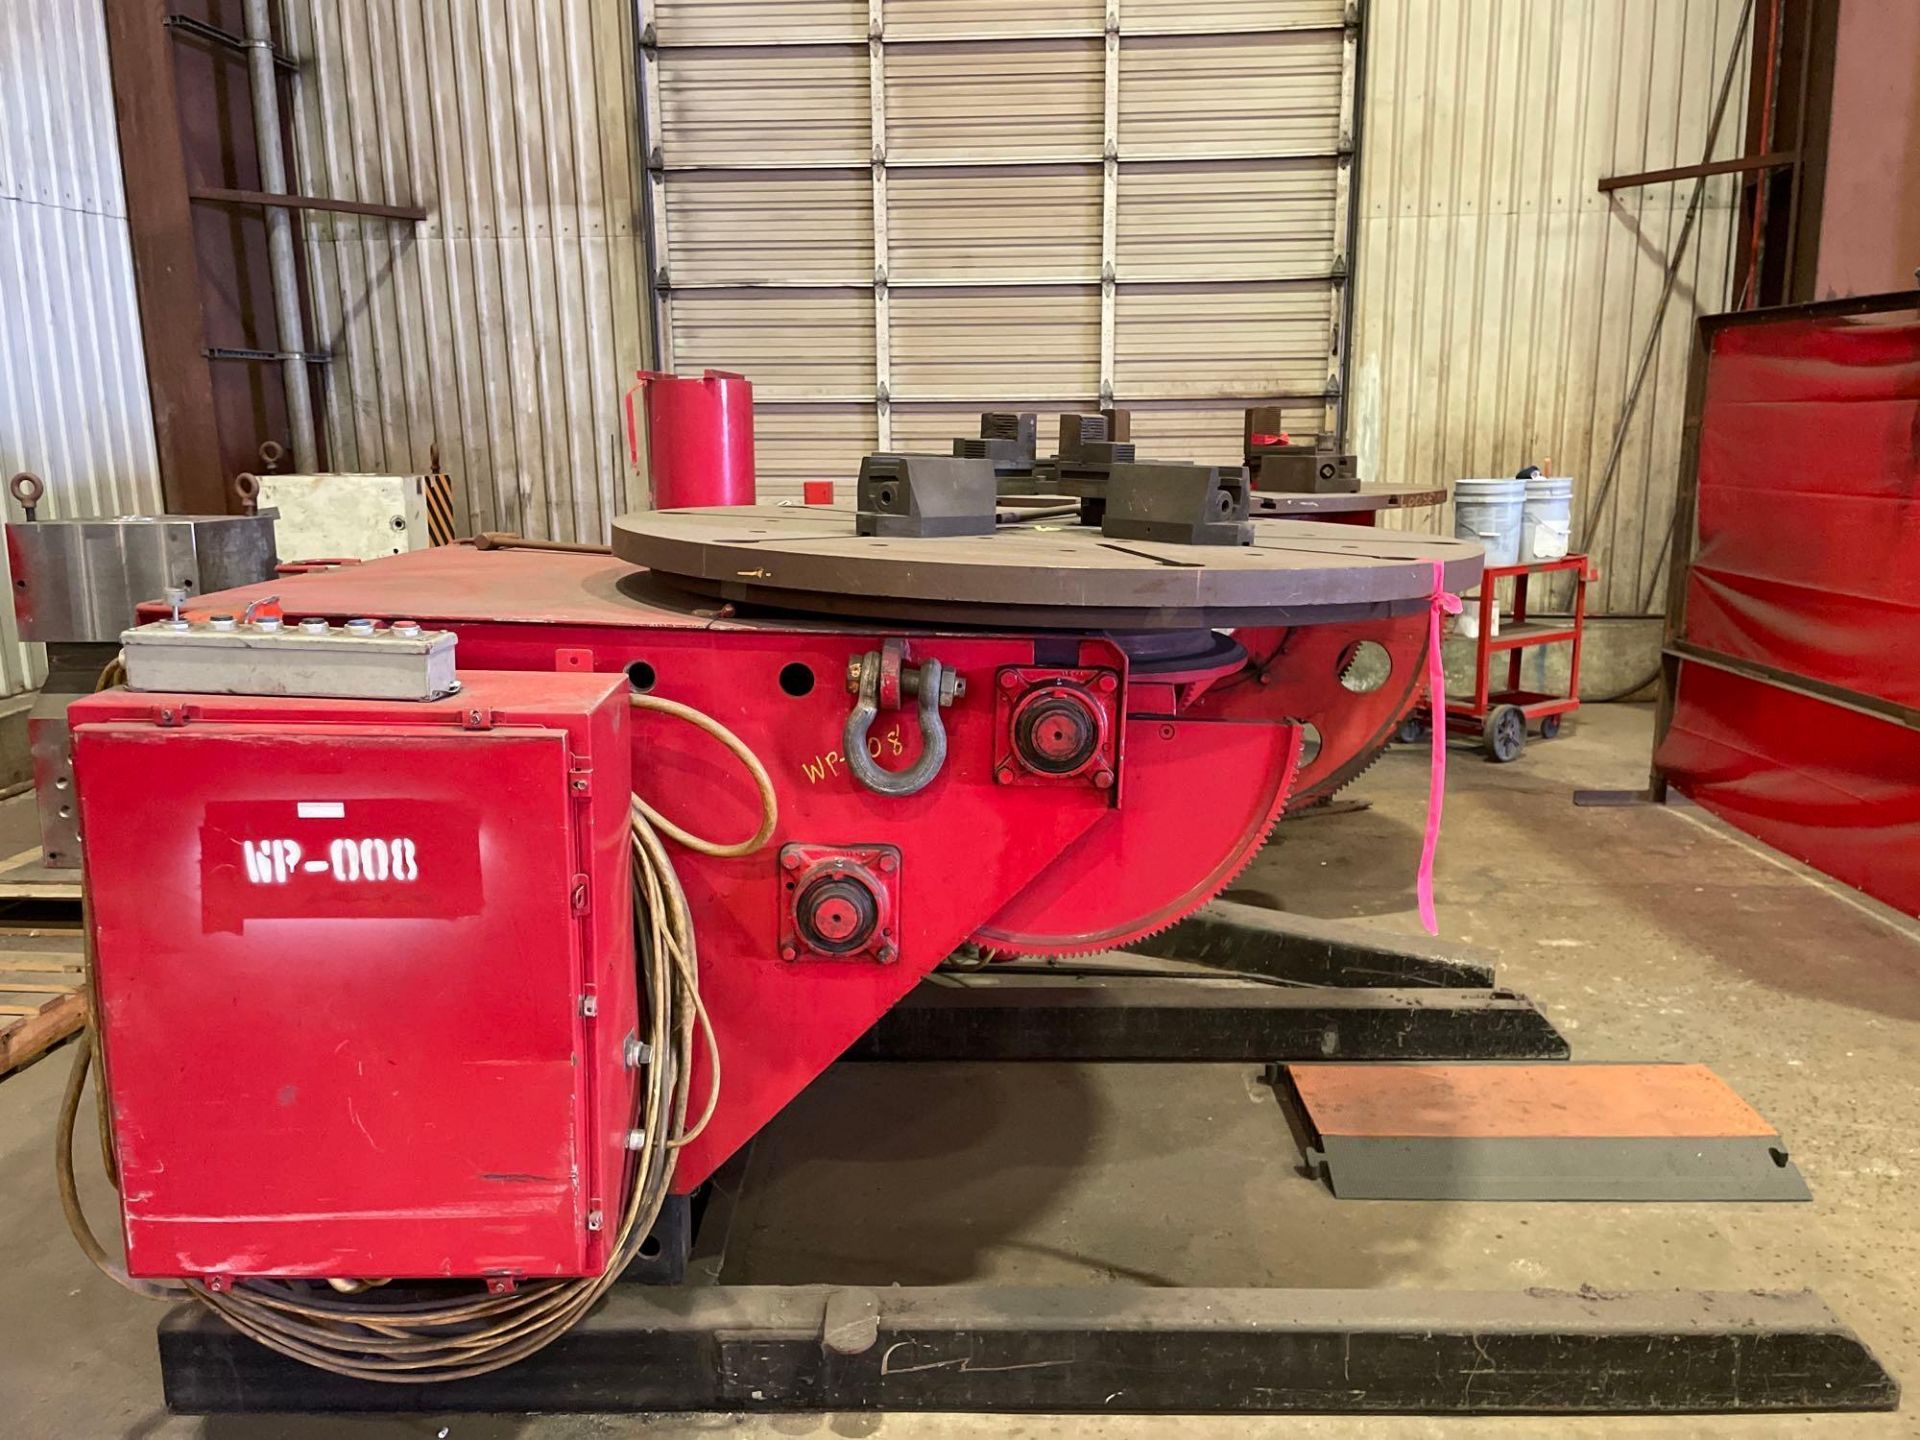 60” Aronson Tilting Welding Positioner, Foot Pedal Activated, Heavy Duty Base - Image 2 of 10